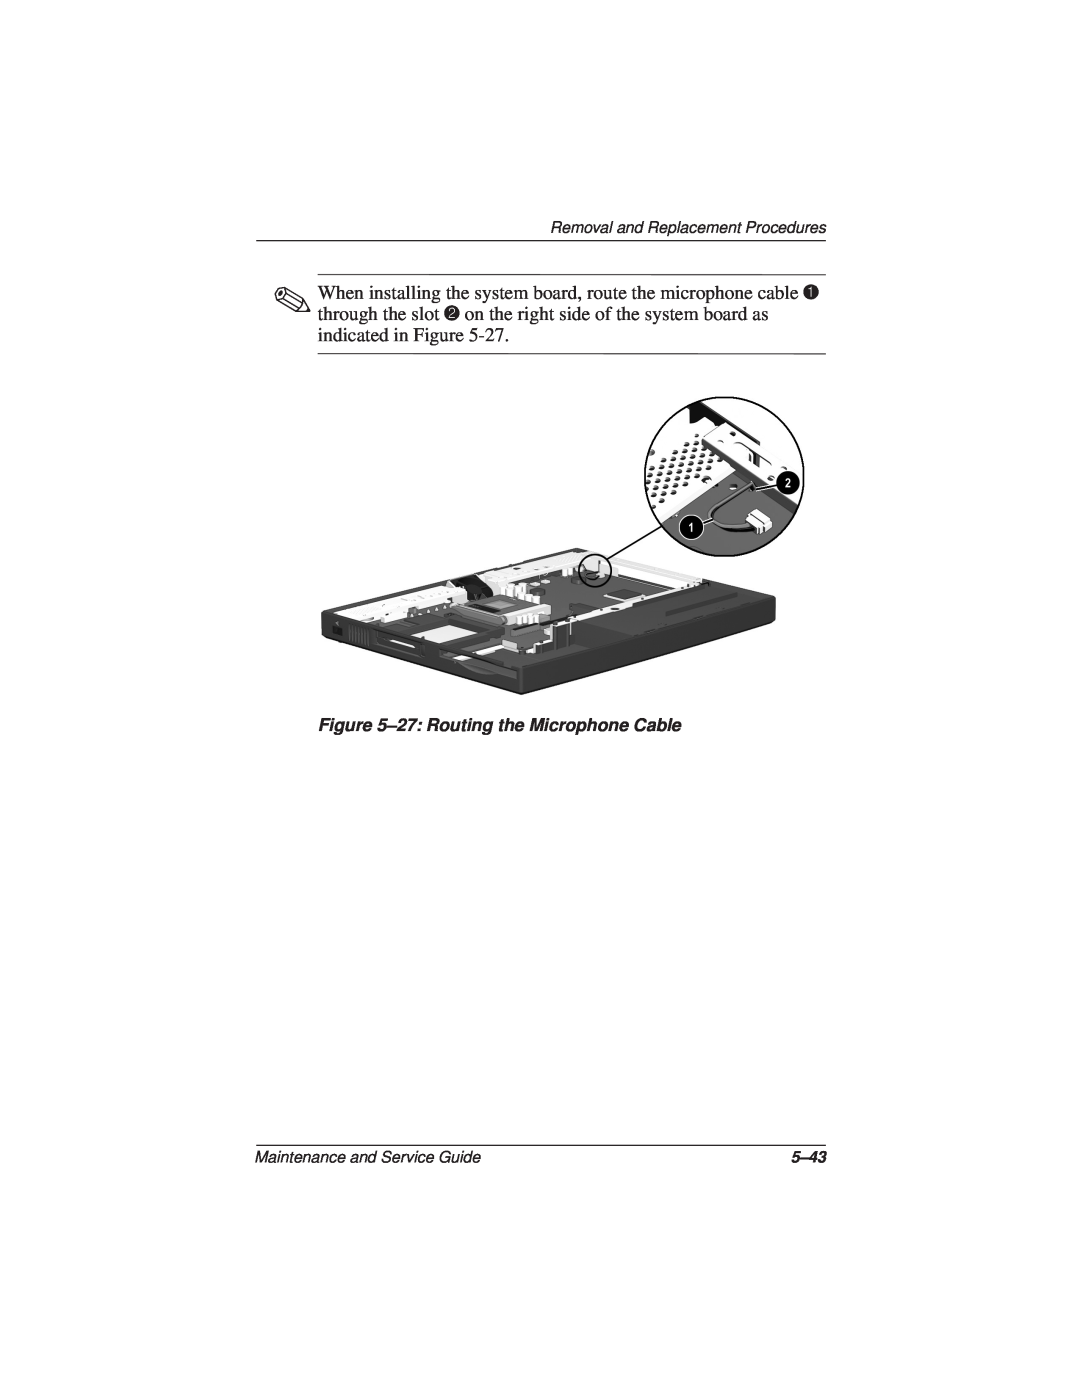 Compaq N110 manual 27 Routing the Microphone Cable, Removal and Replacement Procedures, Maintenance and Service Guide, 5-43 